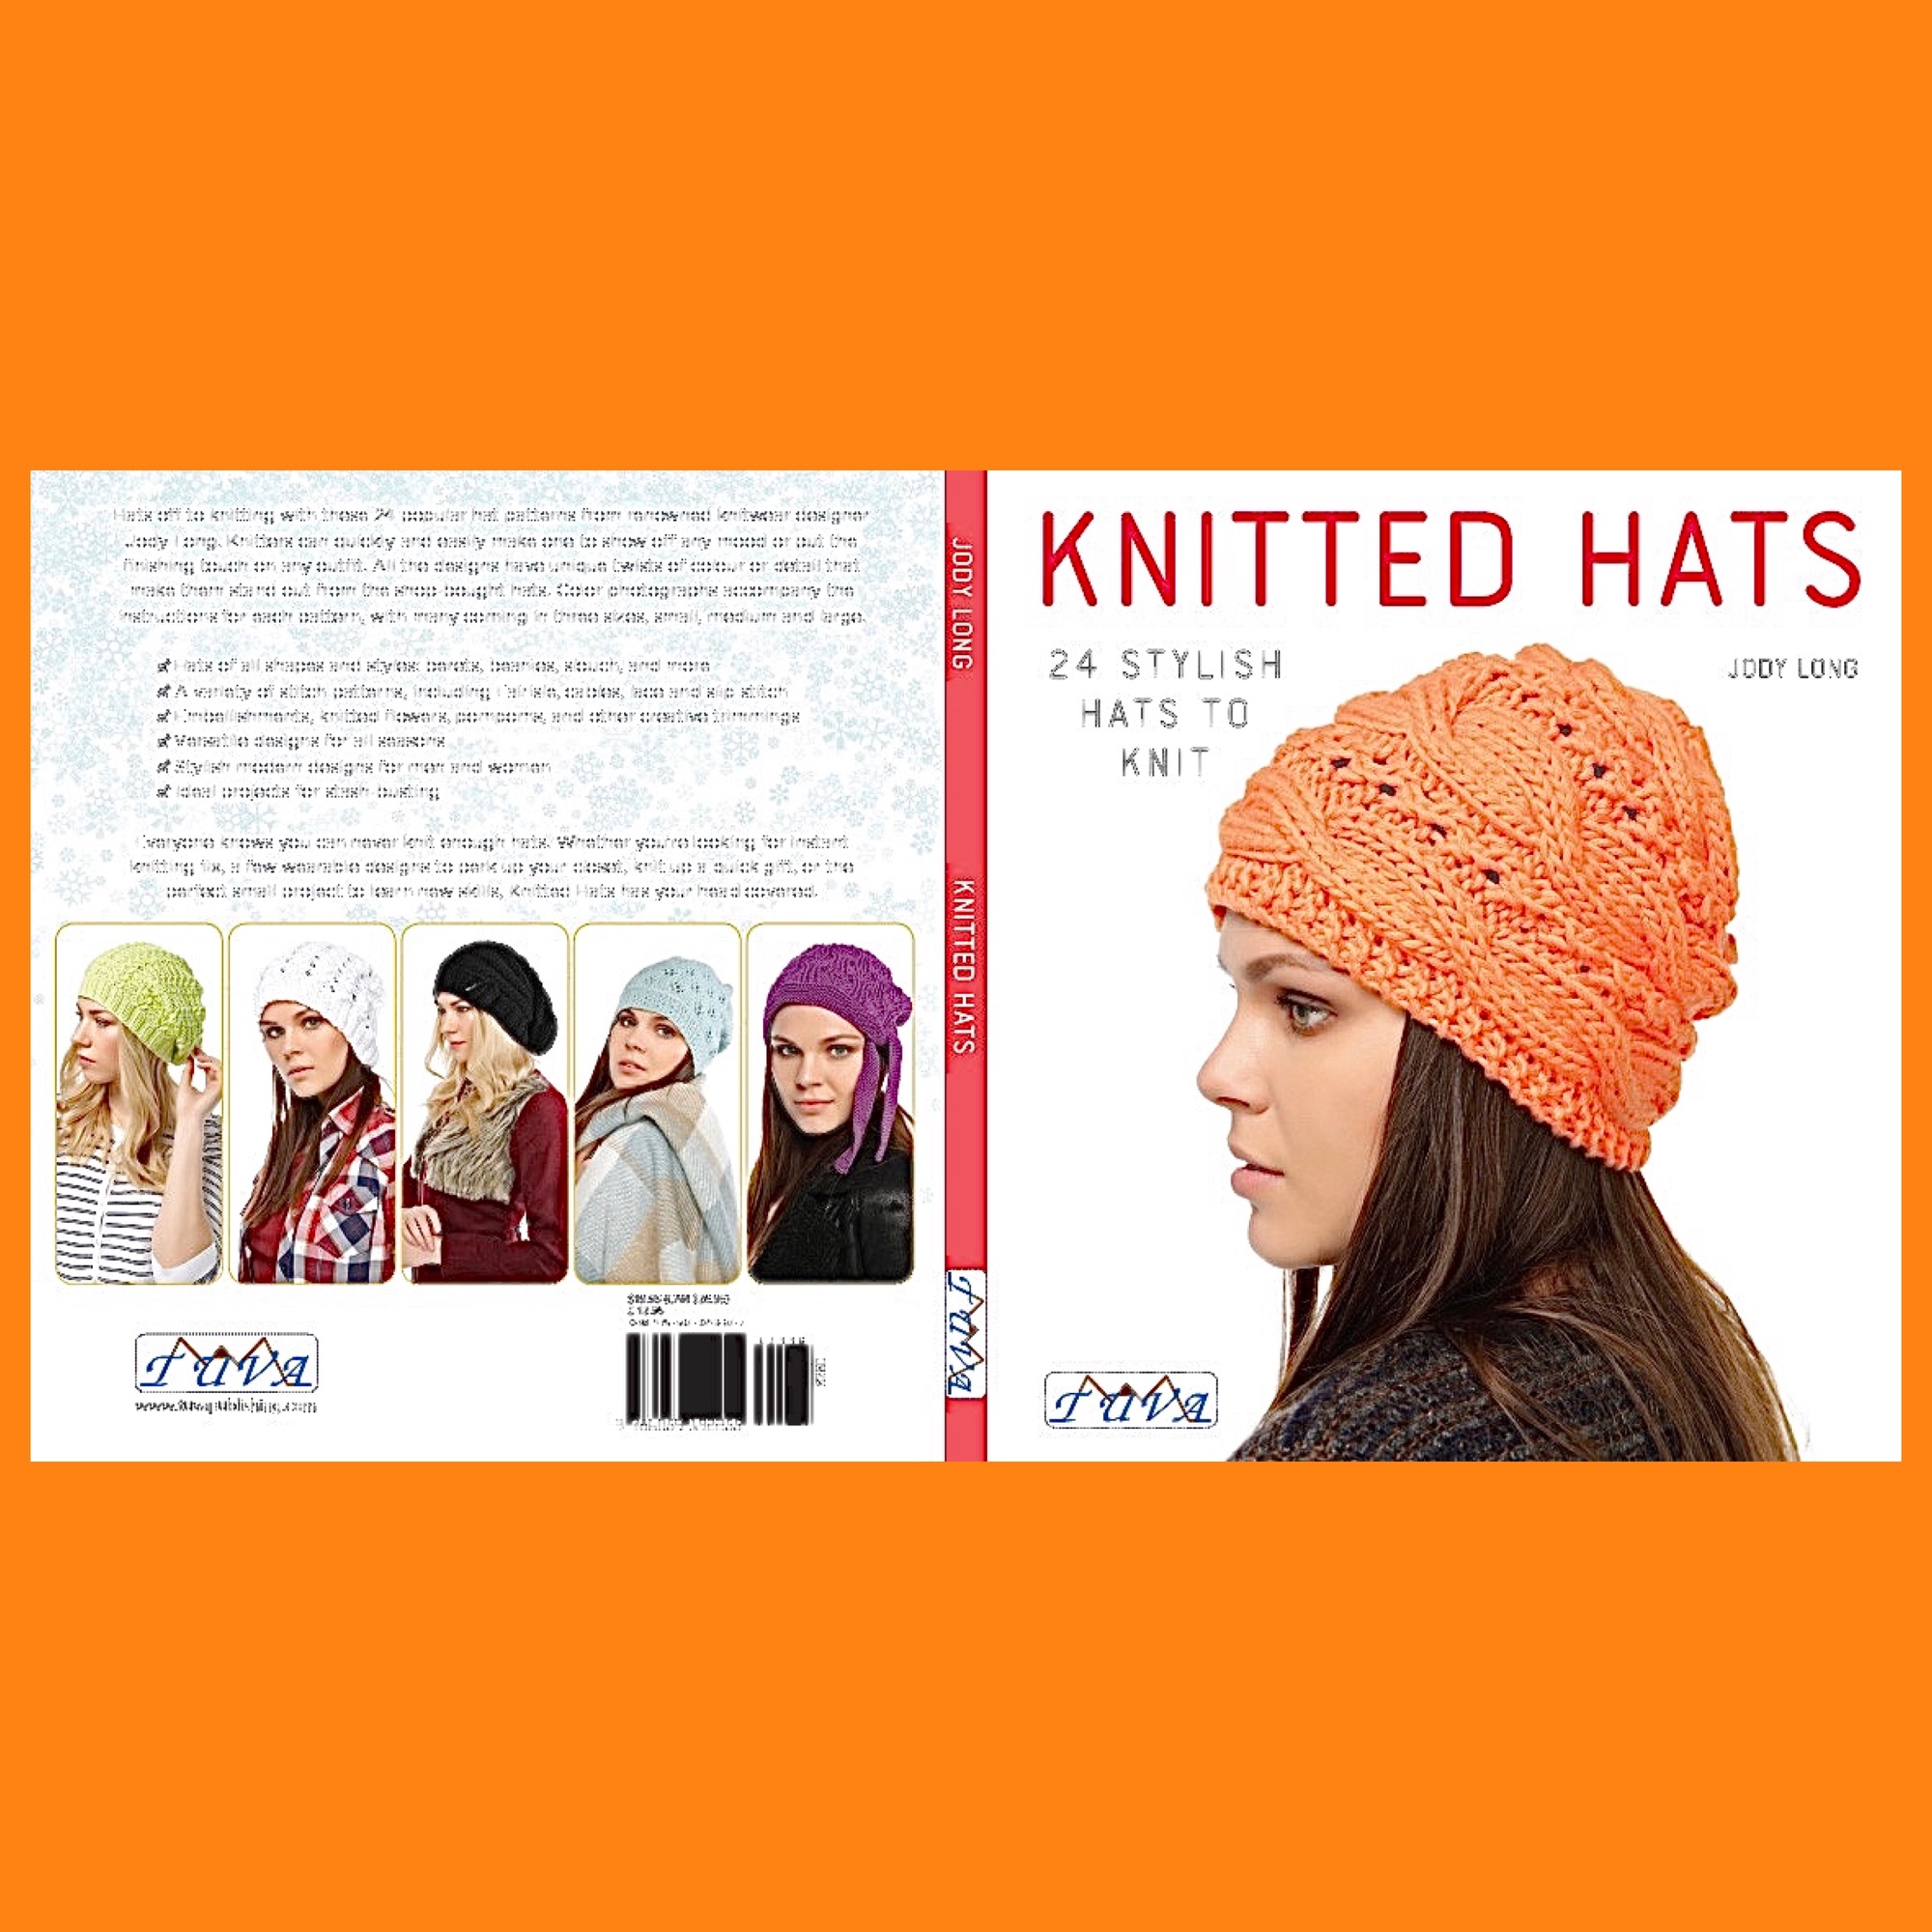 tuva book knitted hats jody long front and back